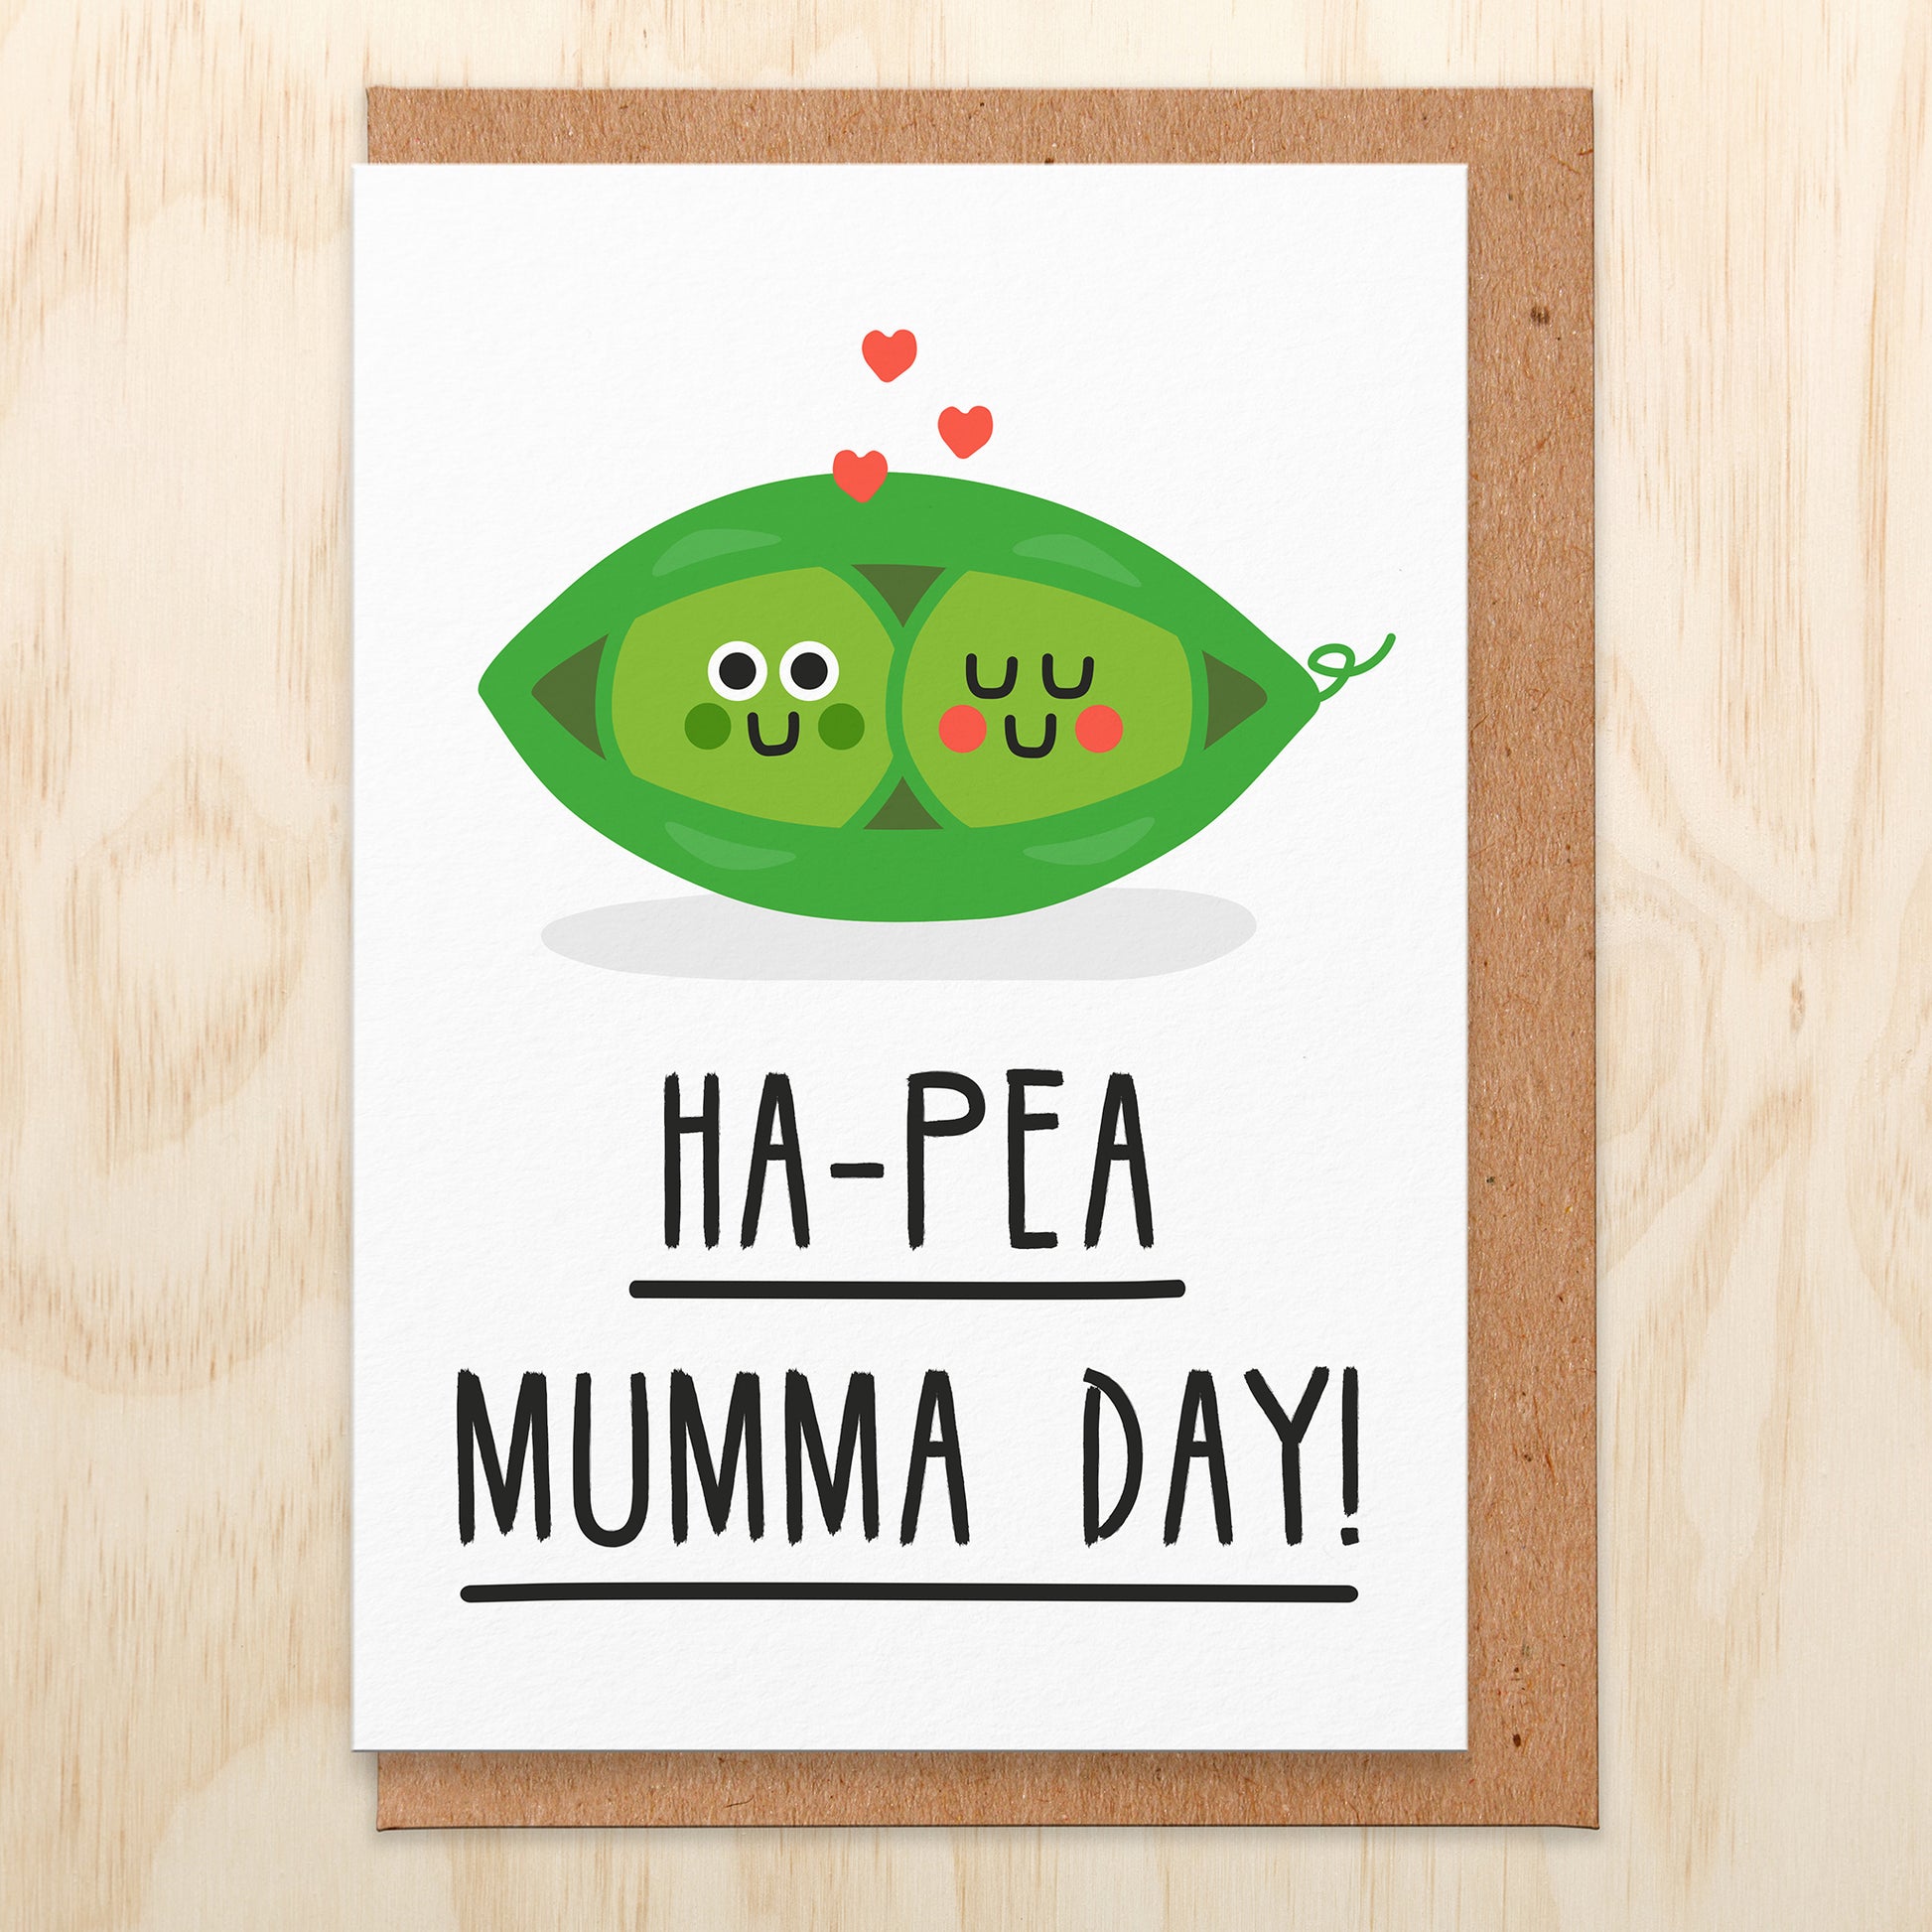 Greetings card that says Ha-Pea Mumma Day and has an illustration of two peas in a pod